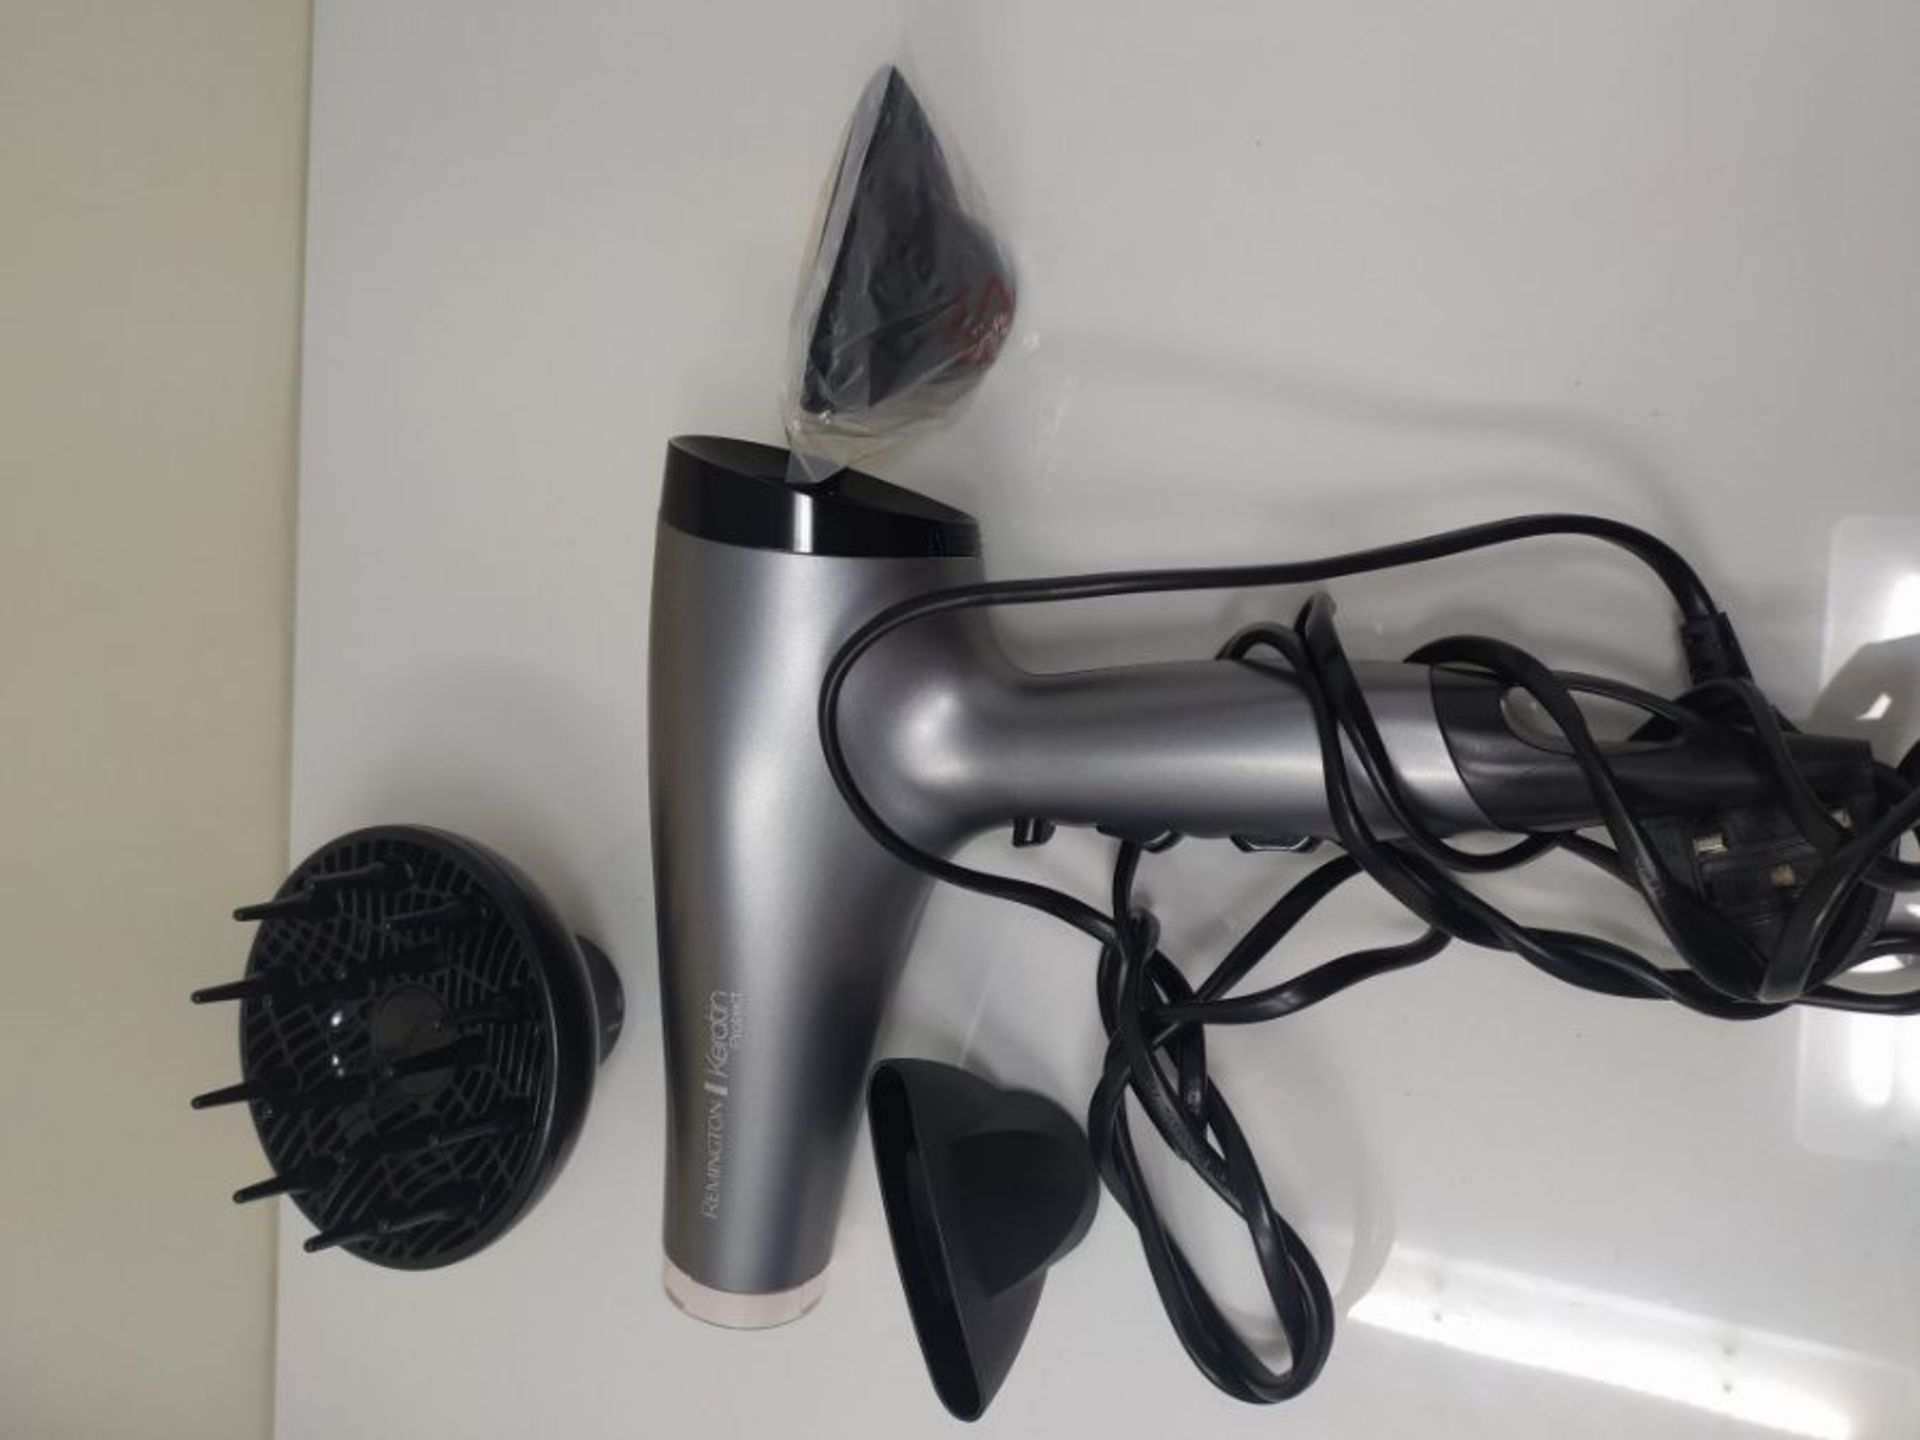 Remington Keratin Protect Ionic Hair Dryer, Infused with Keratin and Almond Oil for He - Image 2 of 2